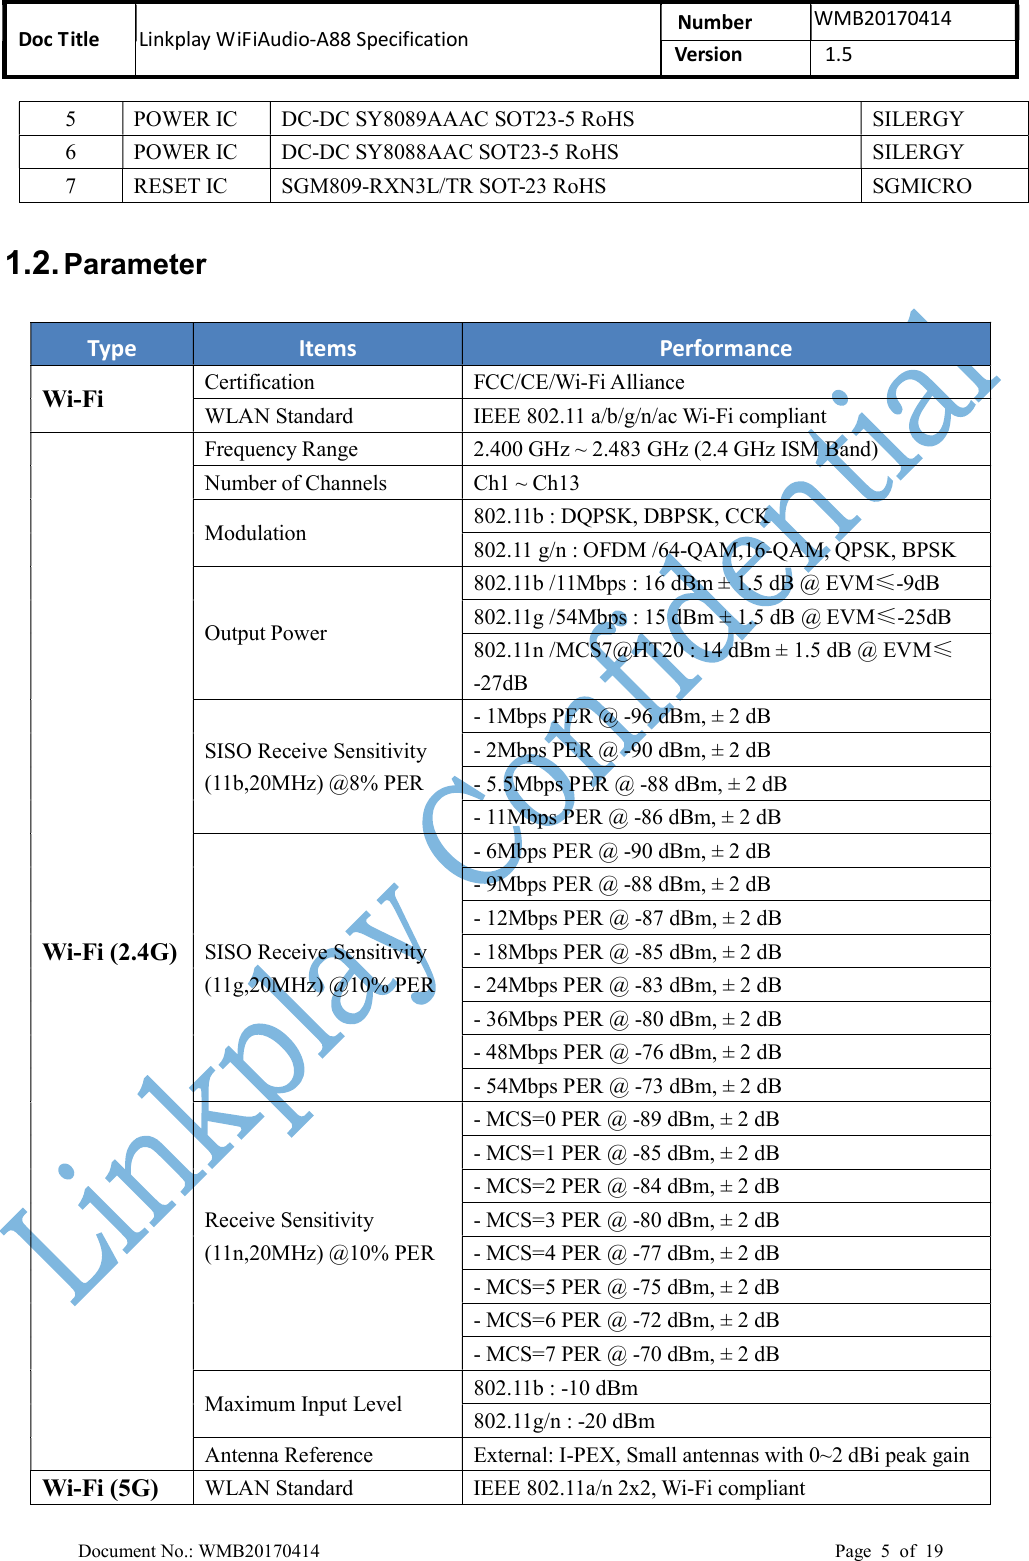 Doc Title  Linkplay WiFiAudio-A88 Specification  Number  WMB20170414 Version    1.5  Document No.: WMB20170414    Page  5  of  19 5  POWER IC  DC-DC SY8089AAAC SOT23-5 RoHS  SILERGY 6  POWER IC  DC-DC SY8088AAC SOT23-5 RoHS  SILERGY 7  RESET IC  SGM809-RXN3L/TR SOT-23 RoHS  SGMICRO 1.2. Parameter Type Items  Performance Wi-Fi  Certification  FCC/CE/Wi-Fi Alliance WLAN Standard  IEEE 802.11 a/b/g/n/ac Wi-Fi compliant Wi-Fi (2.4G) Frequency Range  2.400 GHz ~ 2.483 GHz (2.4 GHz ISM Band) Number of Channels  Ch1 ~ Ch13 Modulation  802.11b : DQPSK, DBPSK, CCK 802.11 g/n : OFDM /64-QAM,16-QAM, QPSK, BPSK Output Power 802.11b /11Mbps : 16 dBm ± 1.5 dB @ EVM≤-9dB 802.11g /54Mbps : 15 dBm ± 1.5 dB @ EVM≤-25dB 802.11n /MCS7@HT20 : 14 dBm ± 1.5 dB @ EVM≤-27dB SISO Receive Sensitivity (11b,20MHz) @8% PER - 1Mbps PER @ -96 dBm, ± 2 dB - 2Mbps PER @ -90 dBm, ± 2 dB - 5.5Mbps PER @ -88 dBm, ± 2 dB - 11Mbps PER @ -86 dBm, ± 2 dB SISO Receive Sensitivity (11g,20MHz) @10% PER - 6Mbps PER @ -90 dBm, ± 2 dB - 9Mbps PER @ -88 dBm, ± 2 dB - 12Mbps PER @ -87 dBm, ± 2 dB - 18Mbps PER @ -85 dBm, ± 2 dB - 24Mbps PER @ -83 dBm, ± 2 dB - 36Mbps PER @ -80 dBm, ± 2 dB - 48Mbps PER @ -76 dBm, ± 2 dB - 54Mbps PER @ -73 dBm, ± 2 dB Receive Sensitivity (11n,20MHz) @10% PER - MCS=0 PER @ -89 dBm, ± 2 dB - MCS=1 PER @ -85 dBm, ± 2 dB - MCS=2 PER @ -84 dBm, ± 2 dB - MCS=3 PER @ -80 dBm, ± 2 dB - MCS=4 PER @ -77 dBm, ± 2 dB - MCS=5 PER @ -75 dBm, ± 2 dB - MCS=6 PER @ -72 dBm, ± 2 dB - MCS=7 PER @ -70 dBm, ± 2 dB Maximum Input Level  802.11b : -10 dBm 802.11g/n : -20 dBm Antenna Reference  External: I-PEX, Small antennas with 0~2 dBi peak gain Wi-Fi (5G)  WLAN Standard  IEEE 802.11a/n 2x2, Wi-Fi compliant 